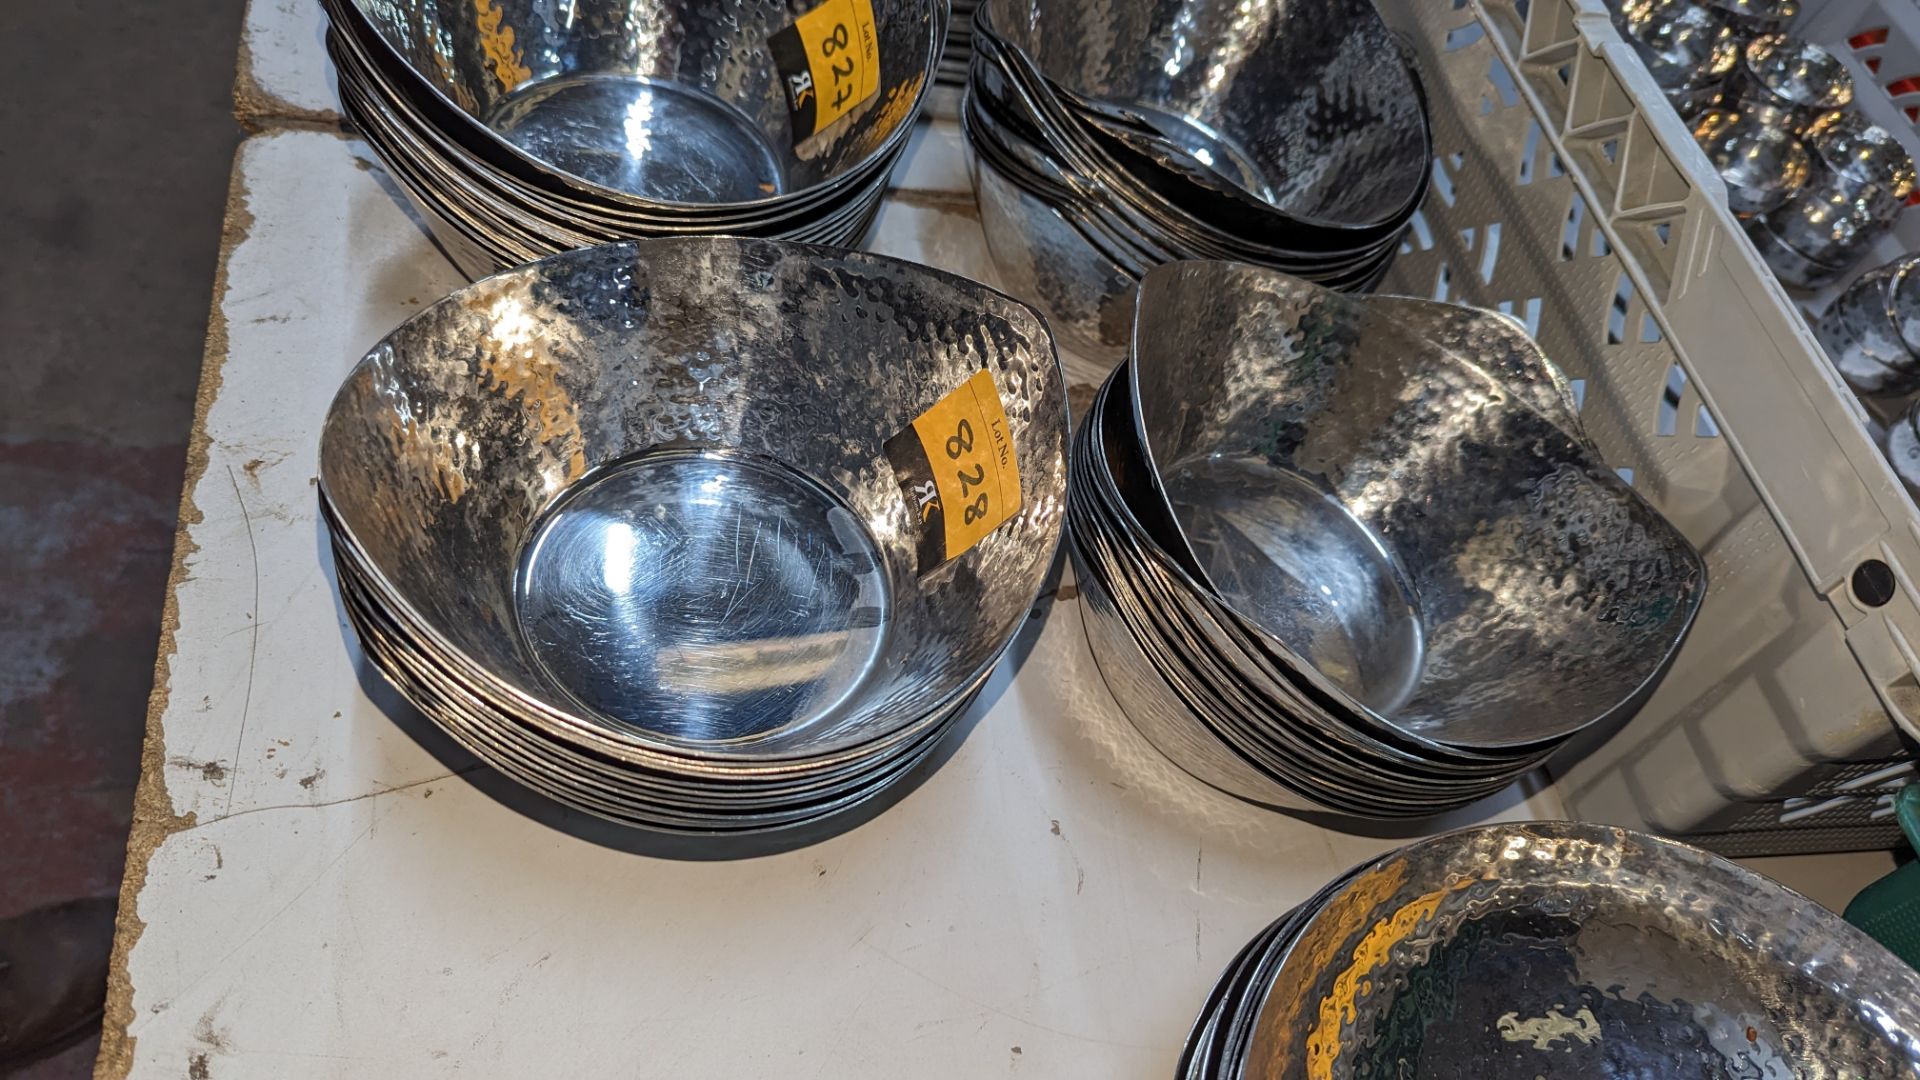 23 off 200mm x 185mm diameter hammered finish metal bowls - Image 3 of 3